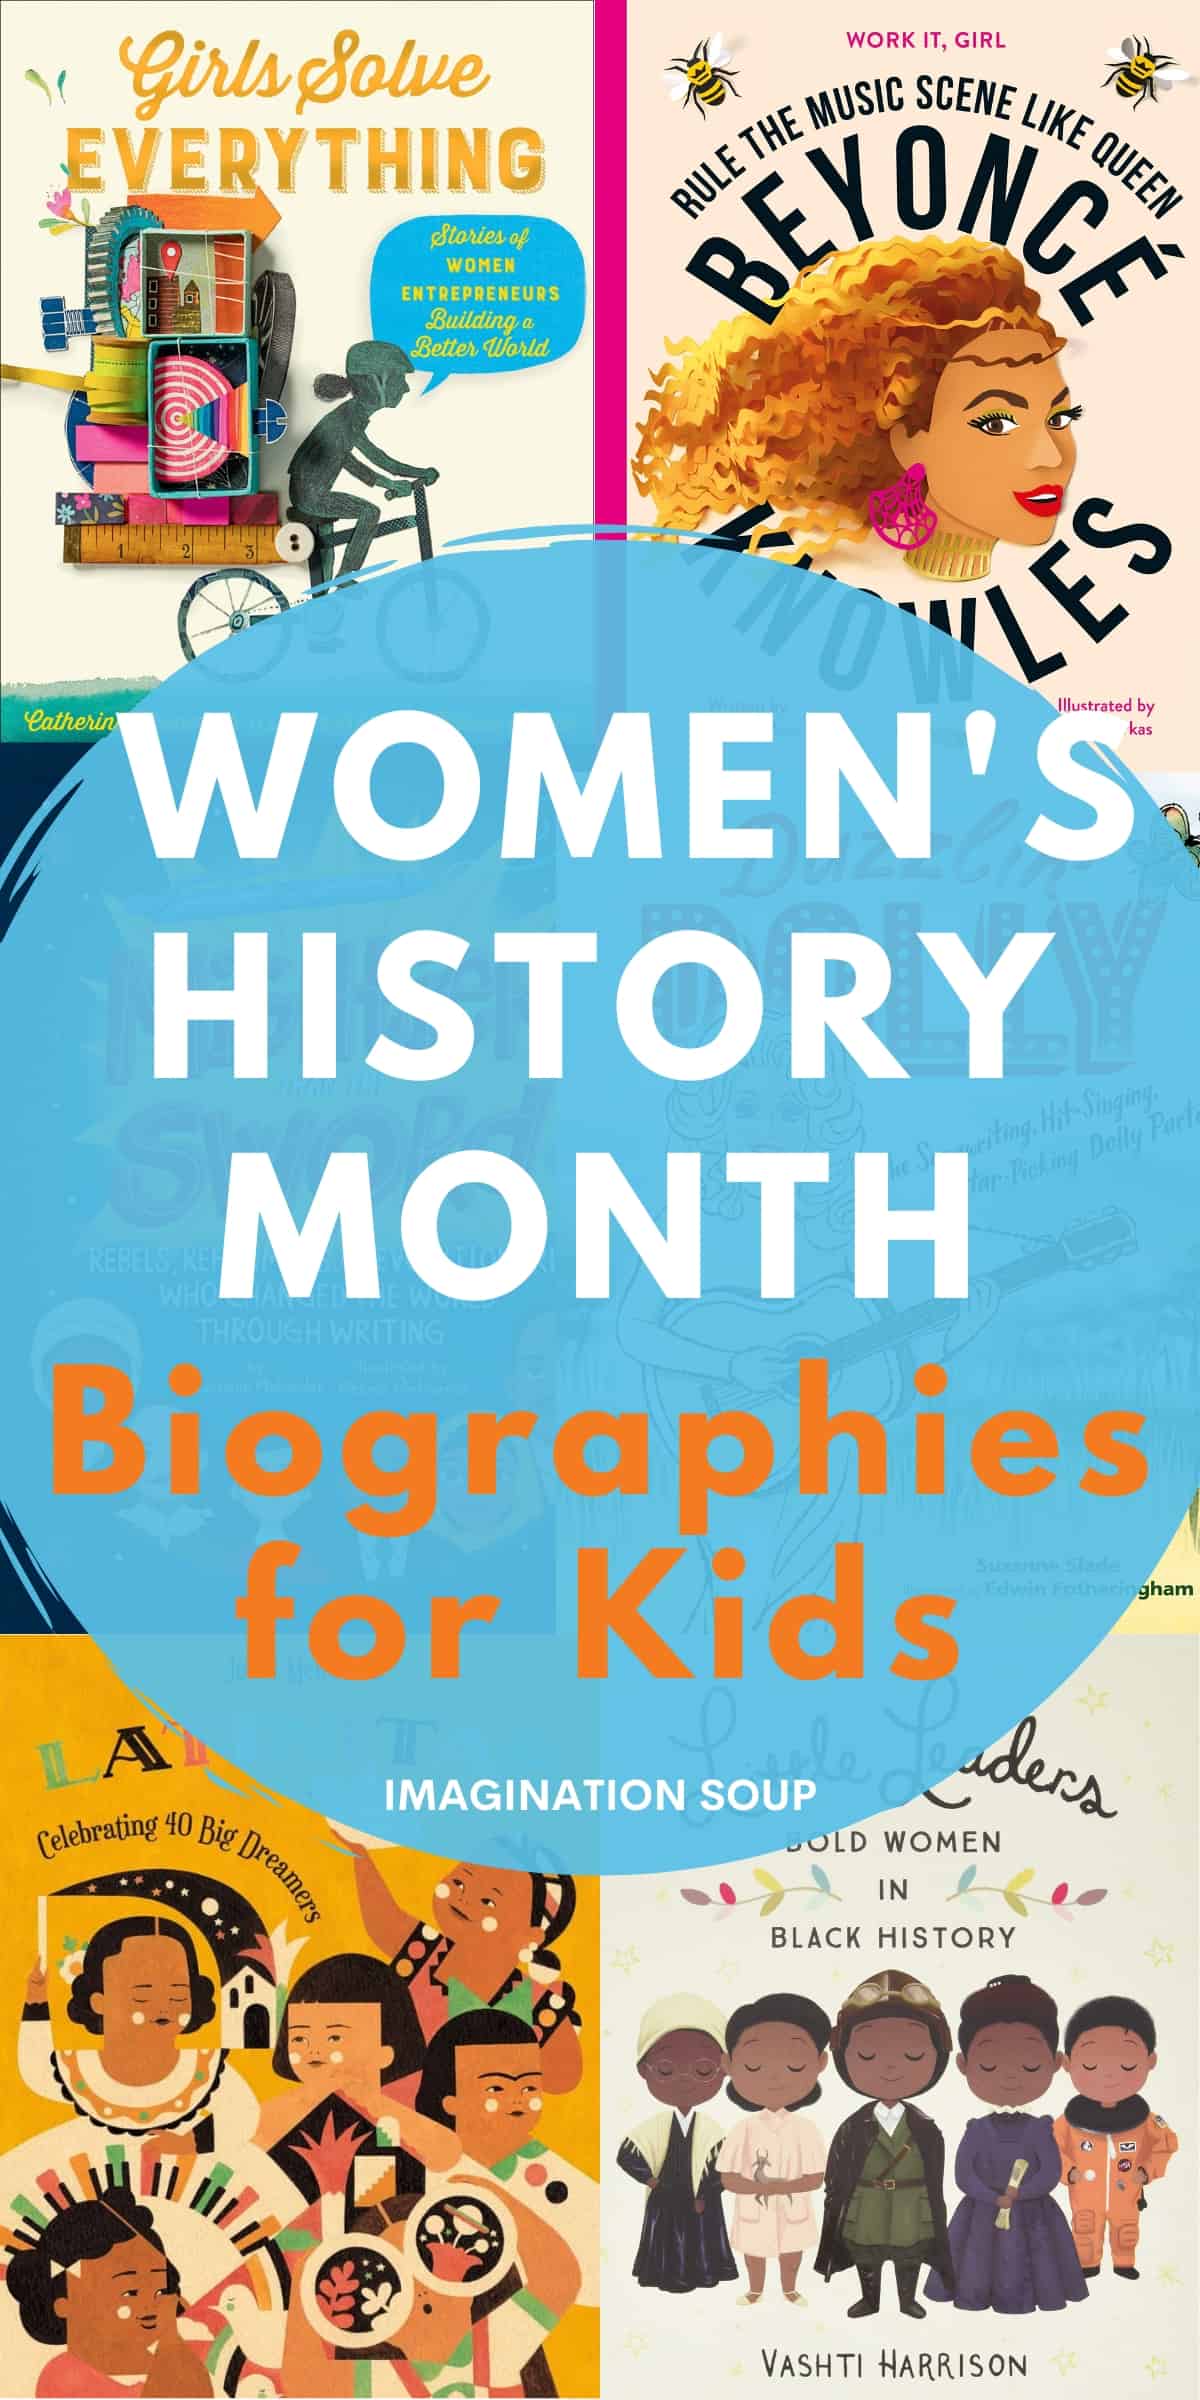 Find amazing women's history month children's book biographies with this list of picture book biographies as well as chapter and middle-grade biographies for kids about famous women for Women's History Month in March! (Or anytime.) This book list of children's books will help kids learn about many amazing women, inspiring big dreams of their own.